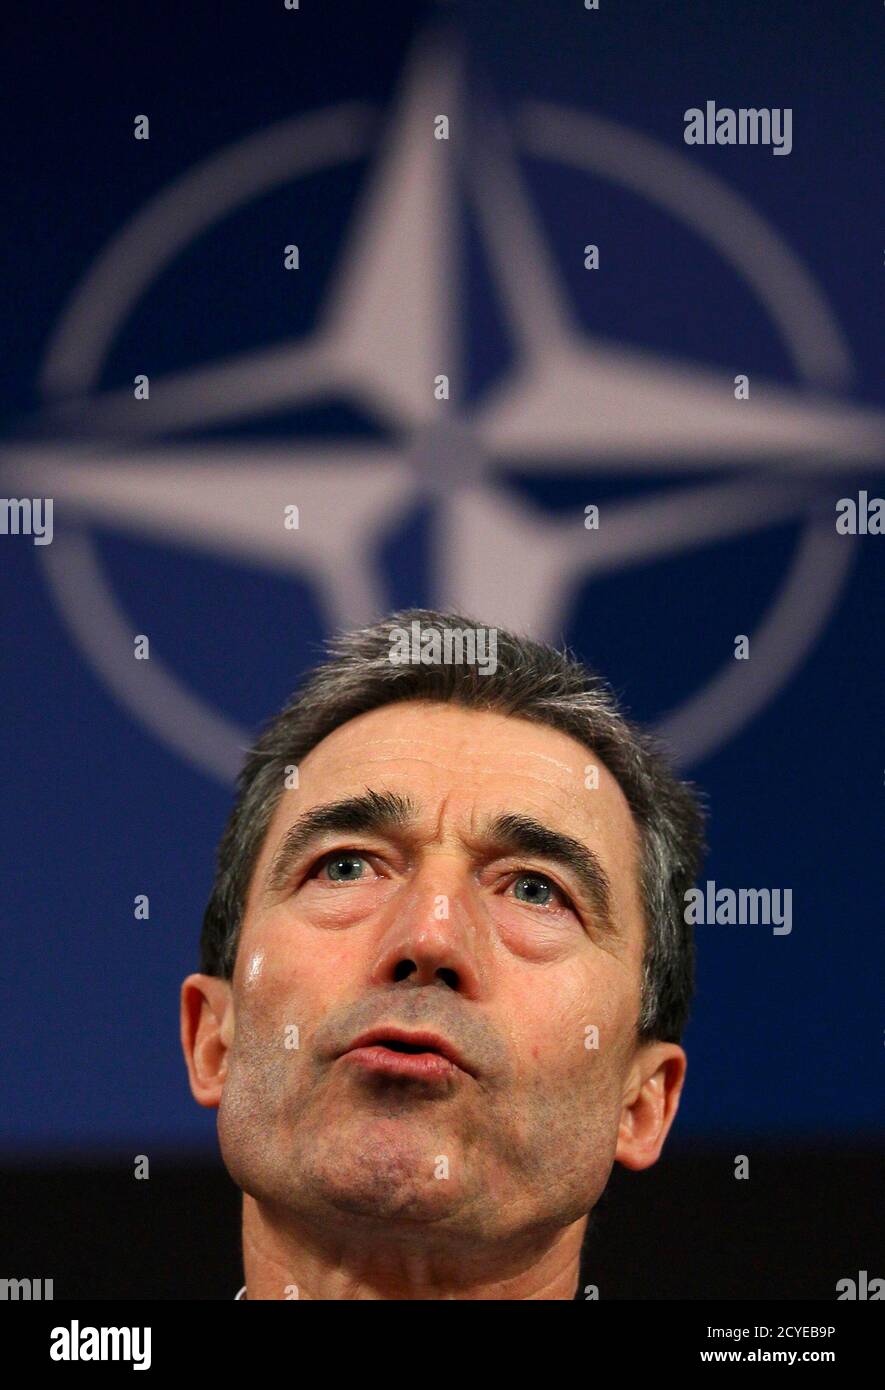 NATO Secretary General Anders Fogh Rasmussen holds a news conference during a NATO defence ministers meeting (NAC) at the Alliance headquarters in Brussels March 10, 2011. NATO defence ministers meeting in Brussels on Thursday and Friday will discuss options to respond to the turmoil in Libya, including a possible no-fly zone, the officials said.      REUTERS/Yves Herman (BELGIUM - Tags: POLITICS CIVIL UNREST MILITARY IMAGES OF THE DAY) Stock Photo